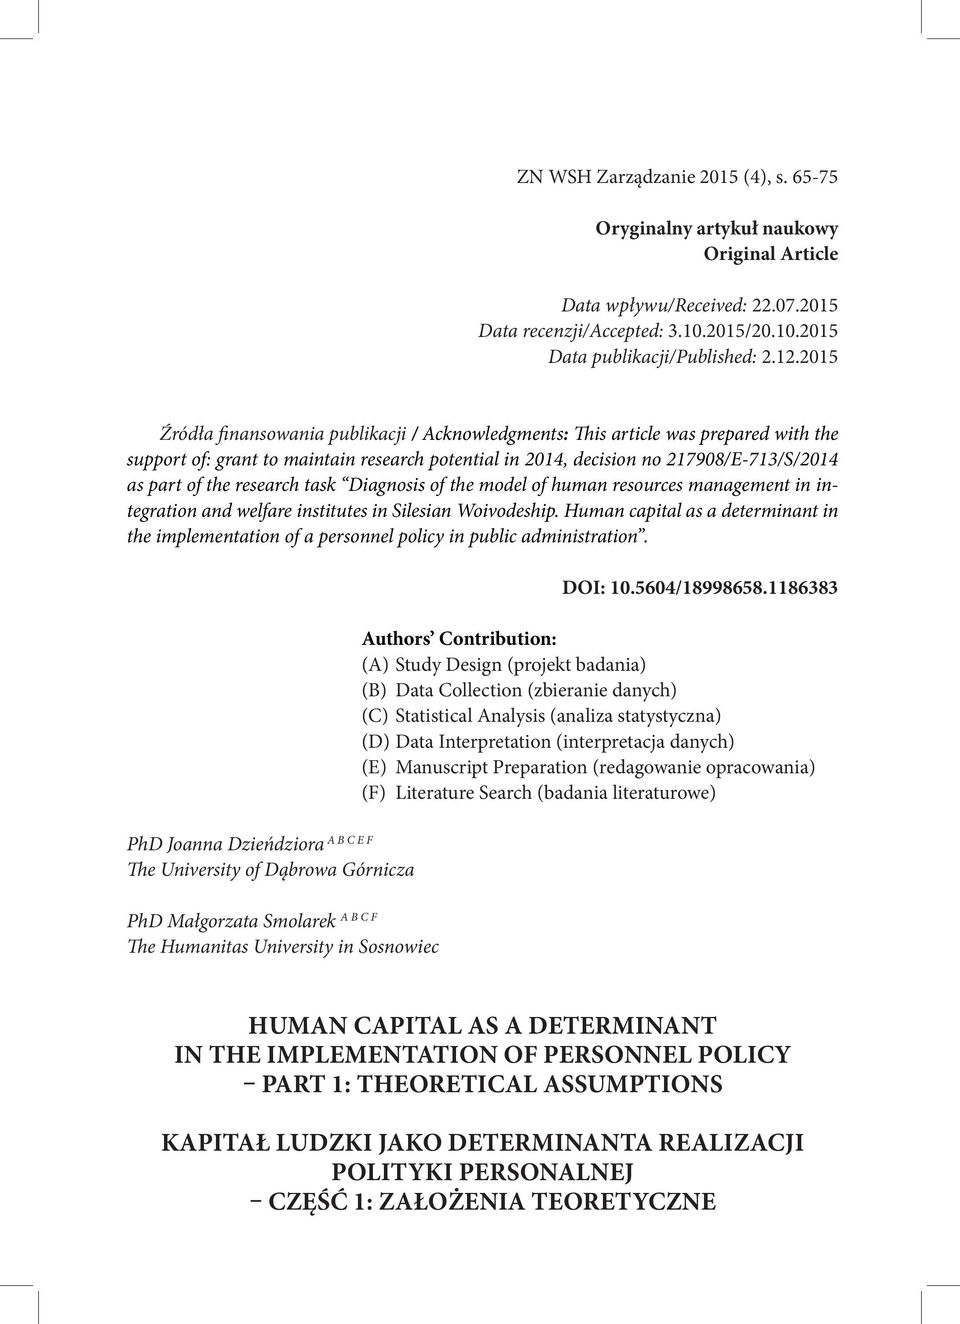 research task Diagnosis of the model of human resources management in integration and welfare institutes in Silesian Woivodeship.